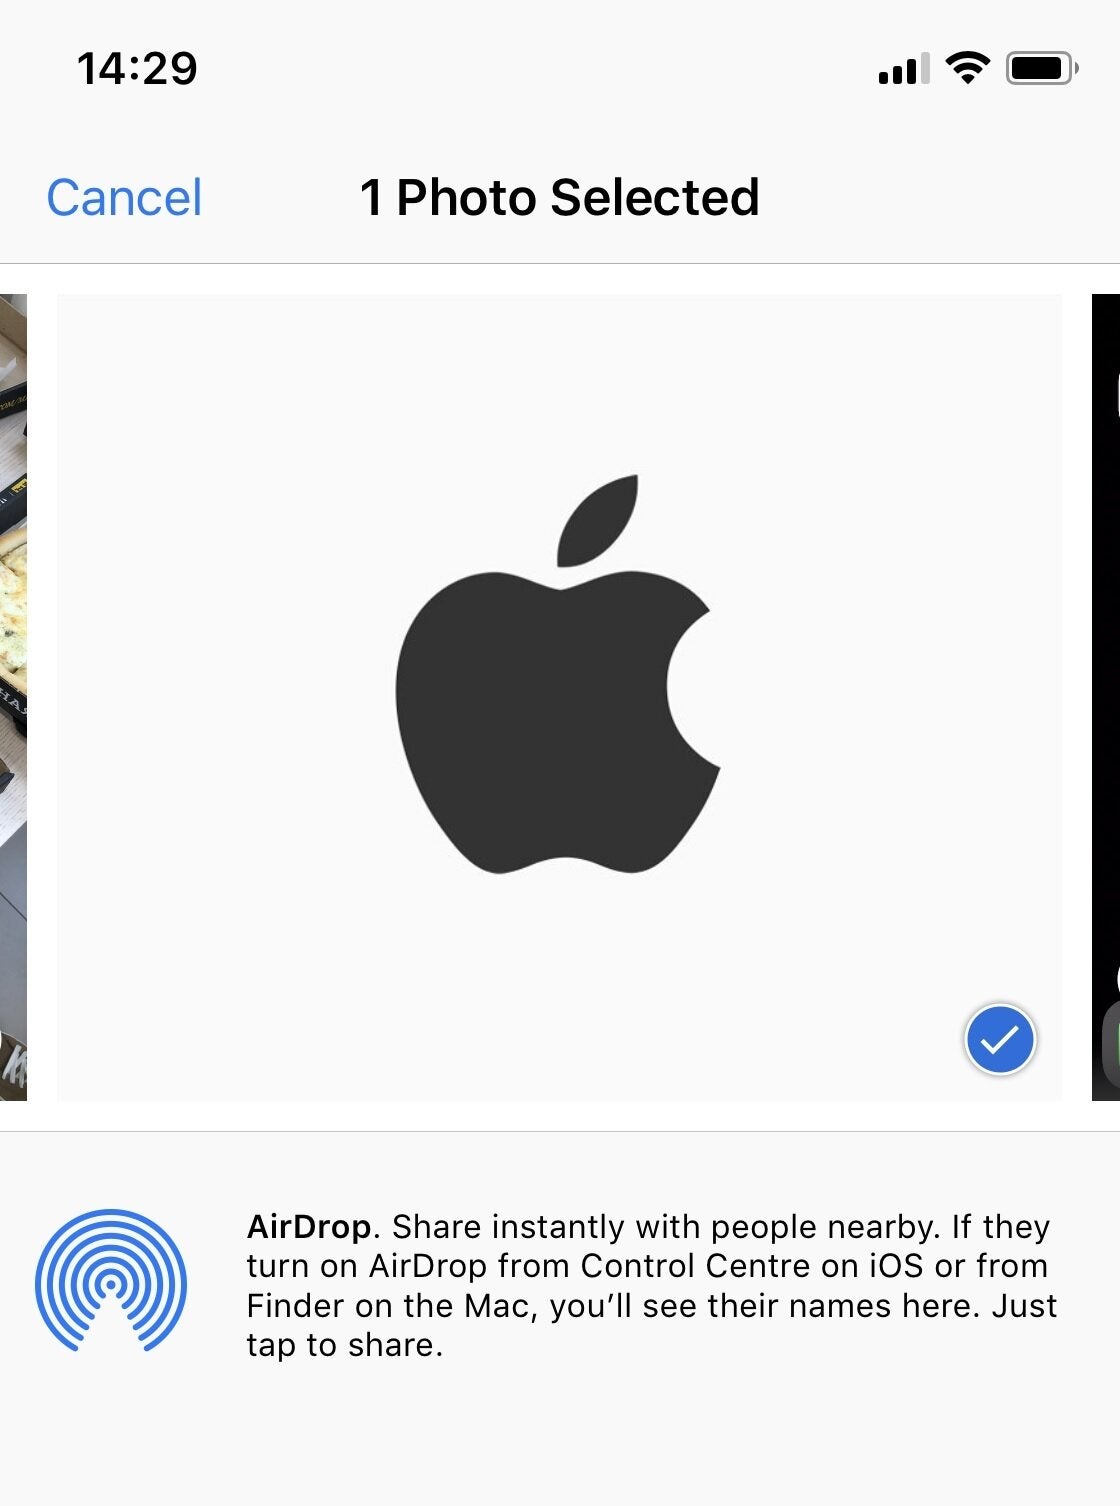 AirDrop could be more harmful to you than helpful - You'll never guess who is leaking your Apple iPhone's number and Wi-Fi password